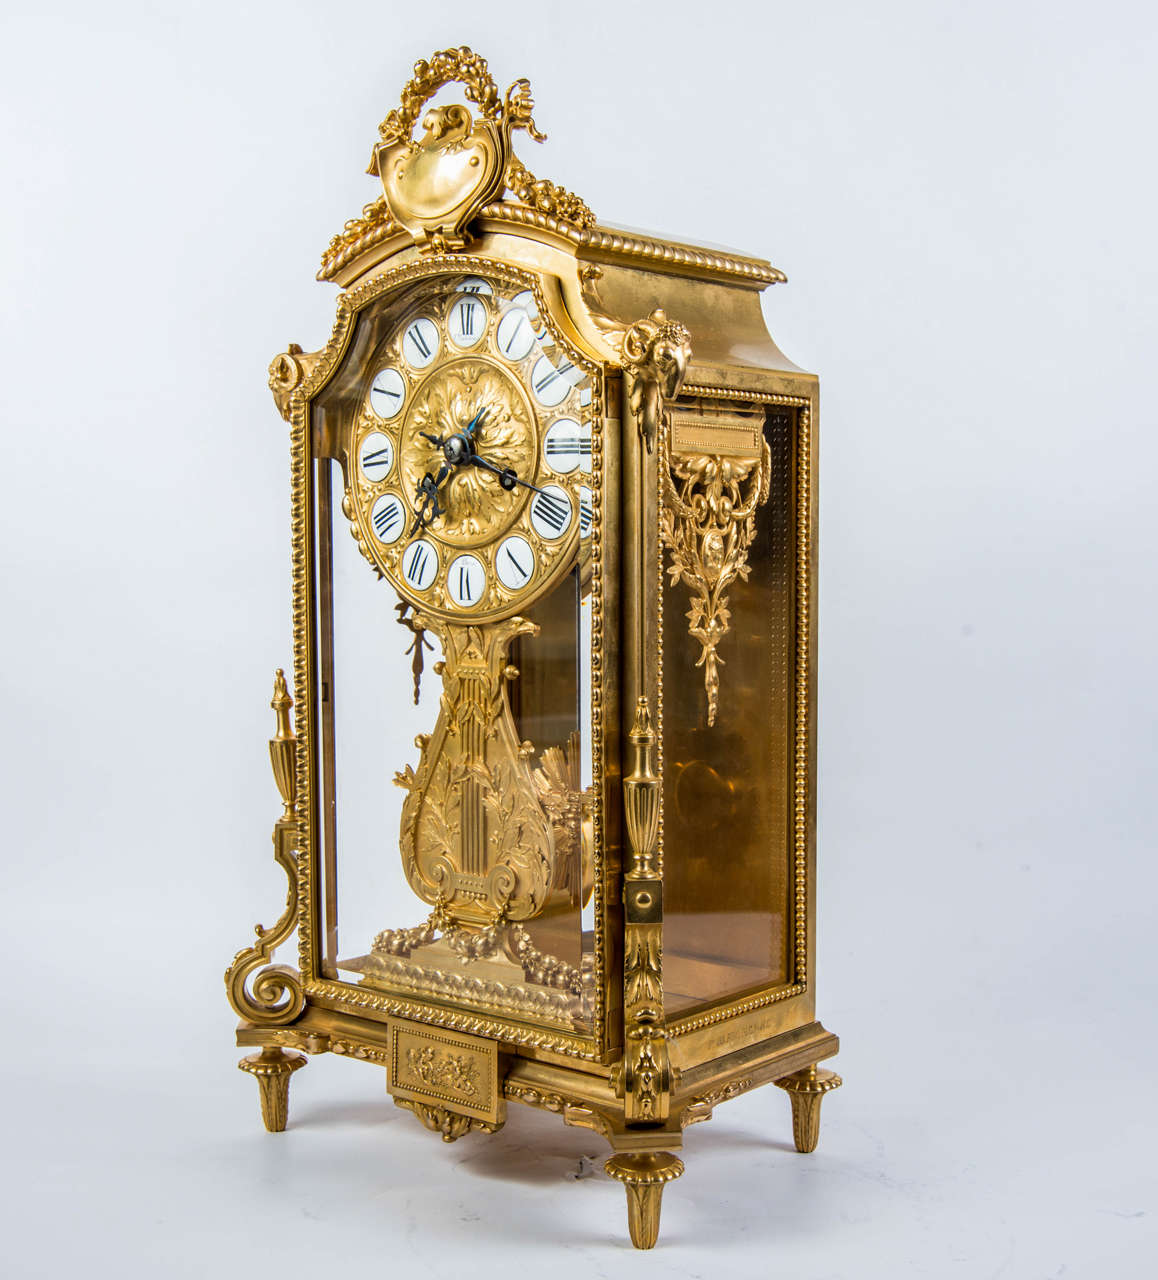 Mantel clock in gilded bronze and cristal, signed Barbedienne
Louis XI style.